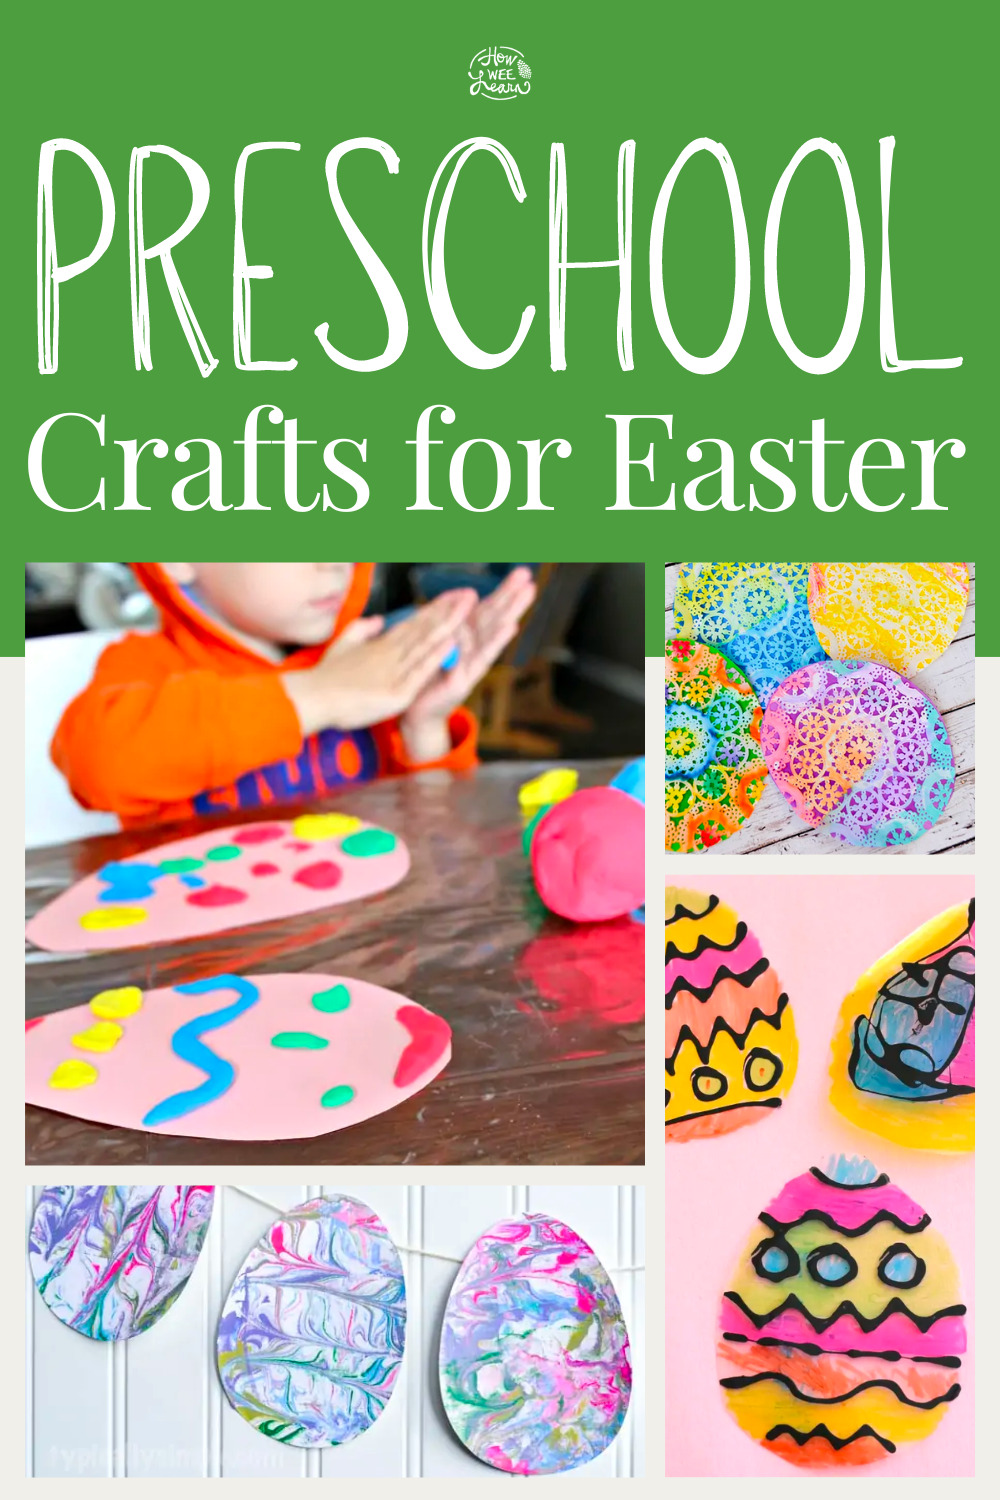 Beautiful Preschool Crafts for Easter